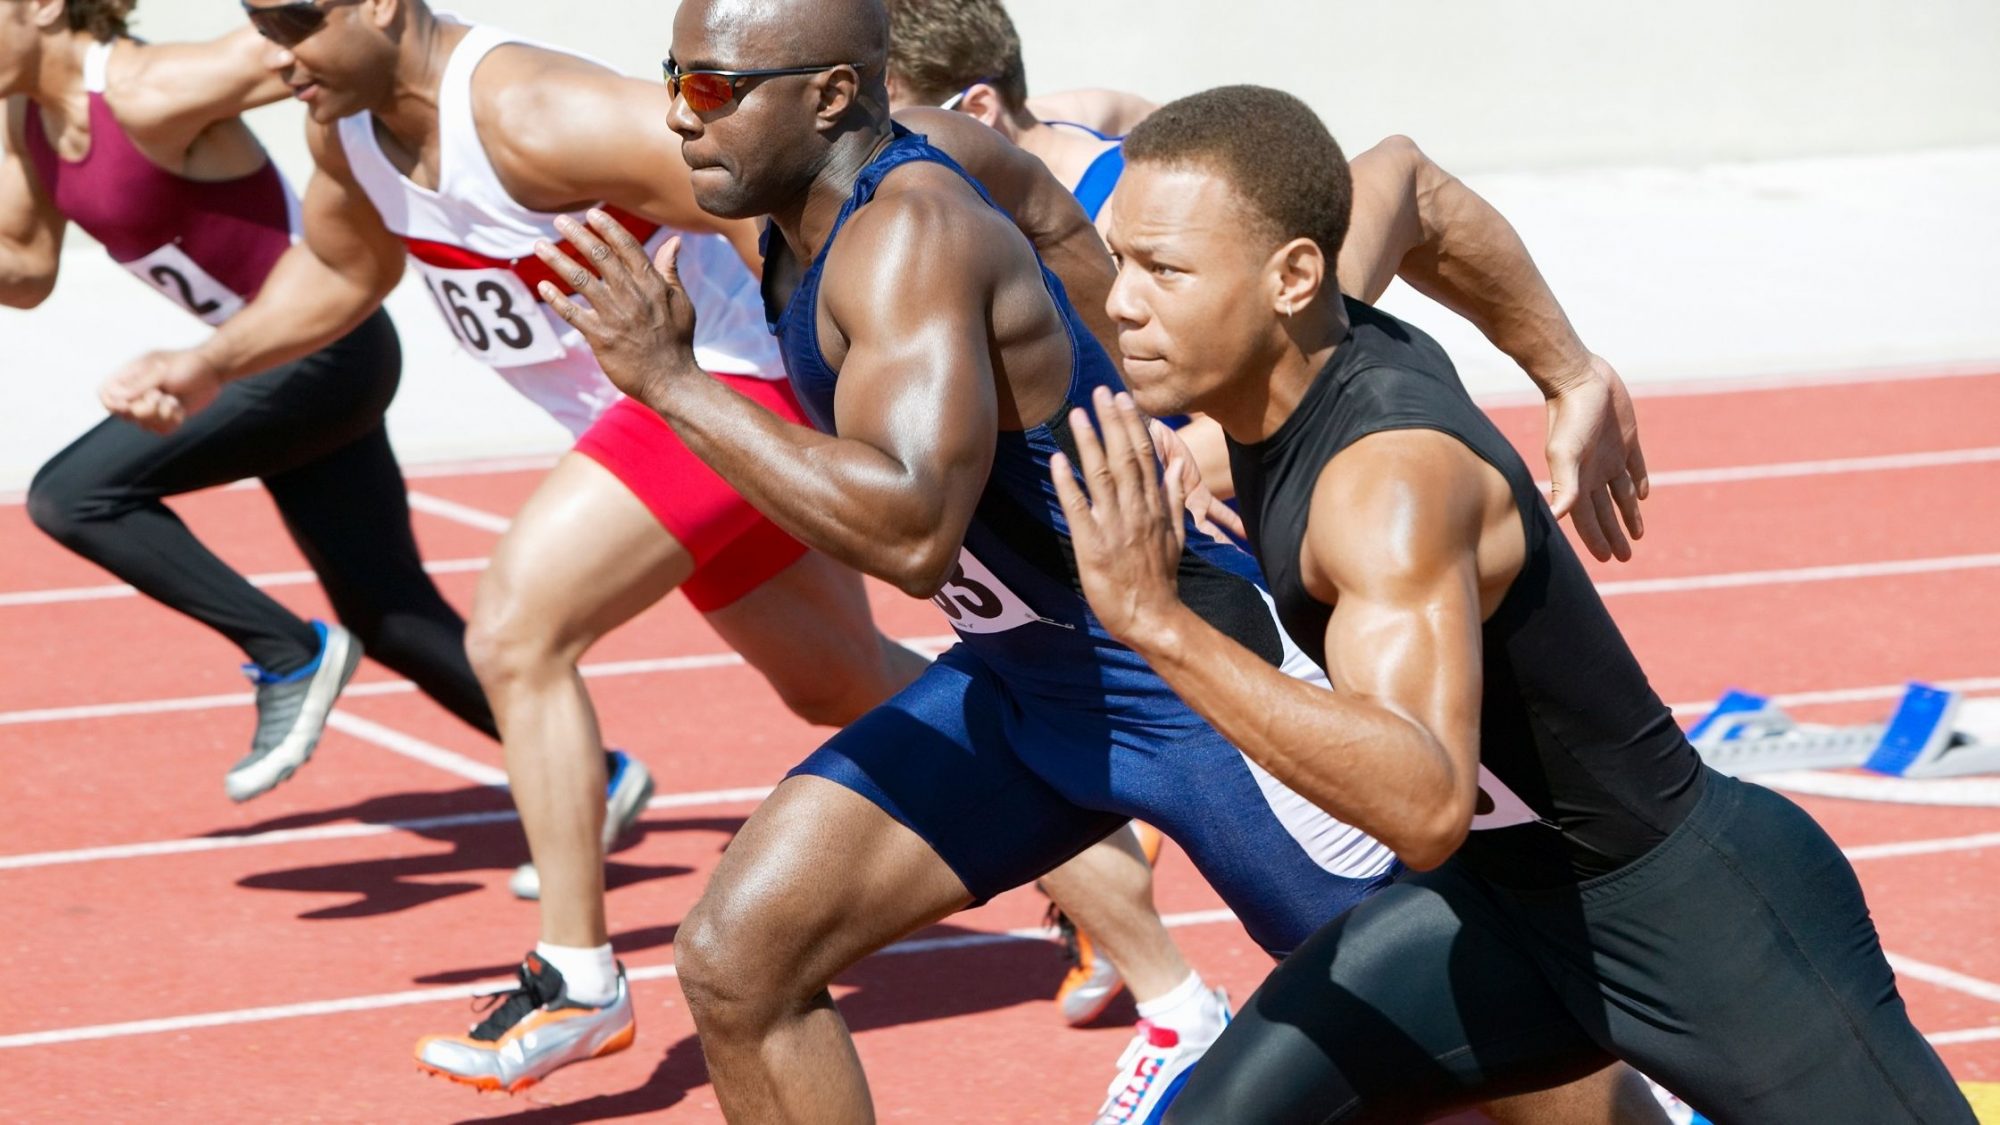 injury prevention for athletes